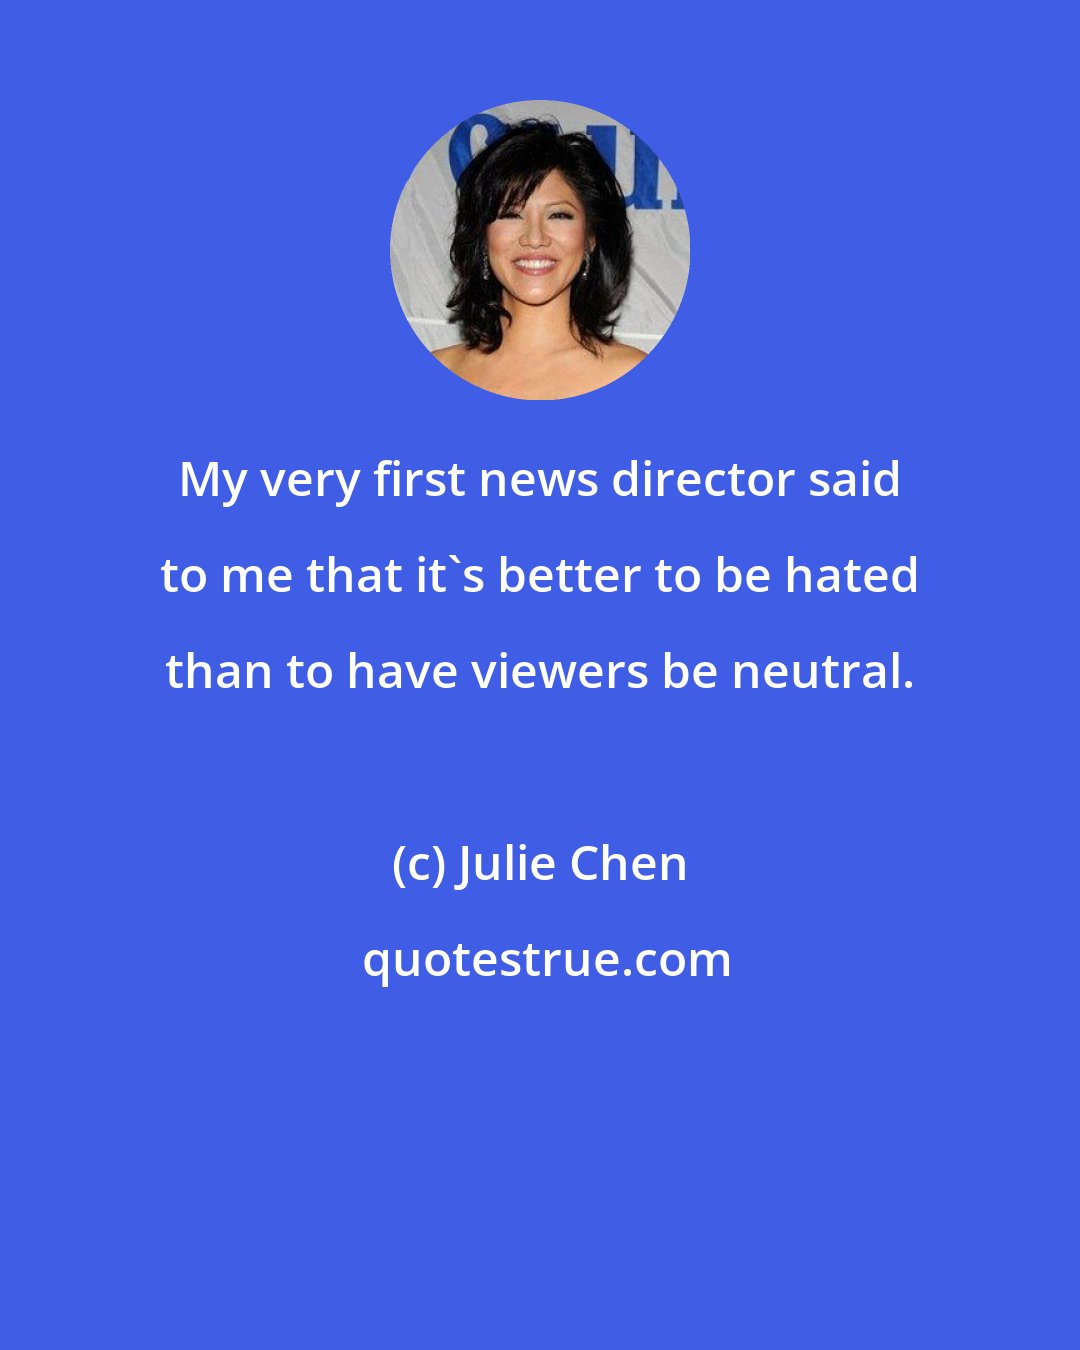 Julie Chen: My very first news director said to me that it's better to be hated than to have viewers be neutral.